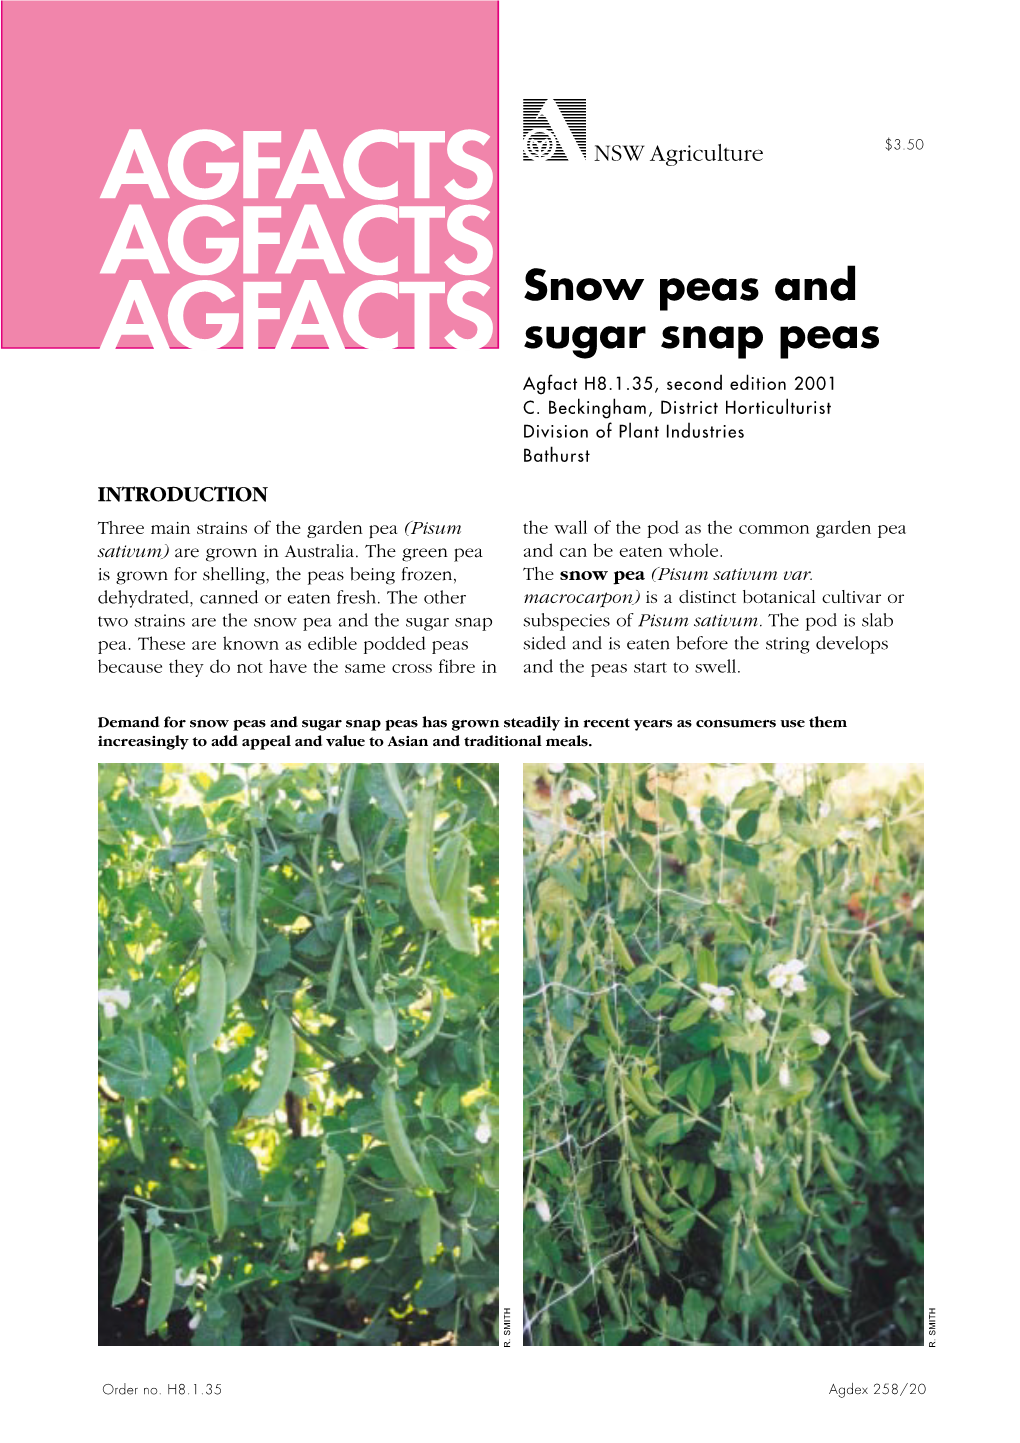 Snow Peas and Sugar Snap Peas Has Grown Steadily in Recent Years As Consumers Use Them Increasingly to Add Appeal and Value to Asian and Traditional Meals